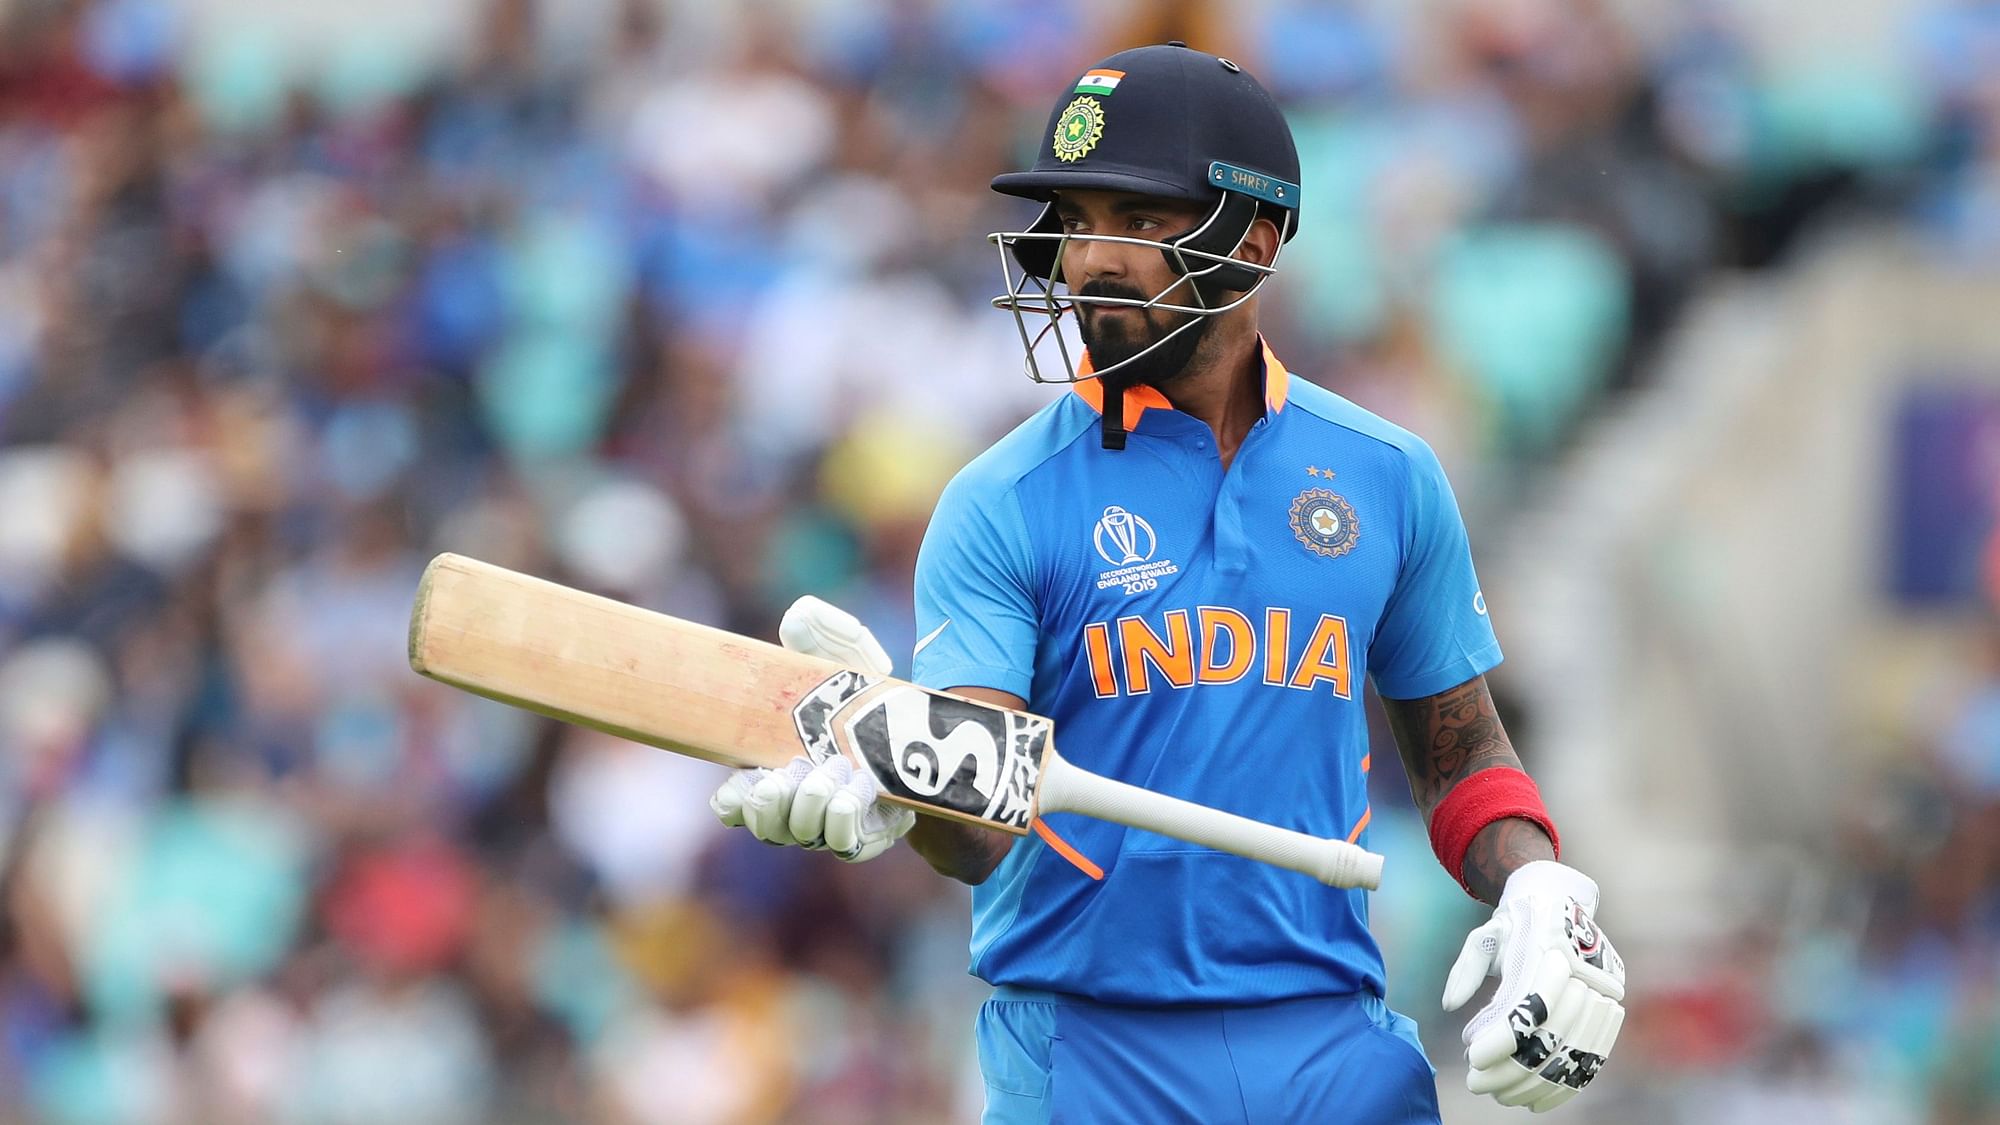 KL Rahul has virtually sealed the No 4 spot by scoring a century in the warm-up game against Bangladesh.